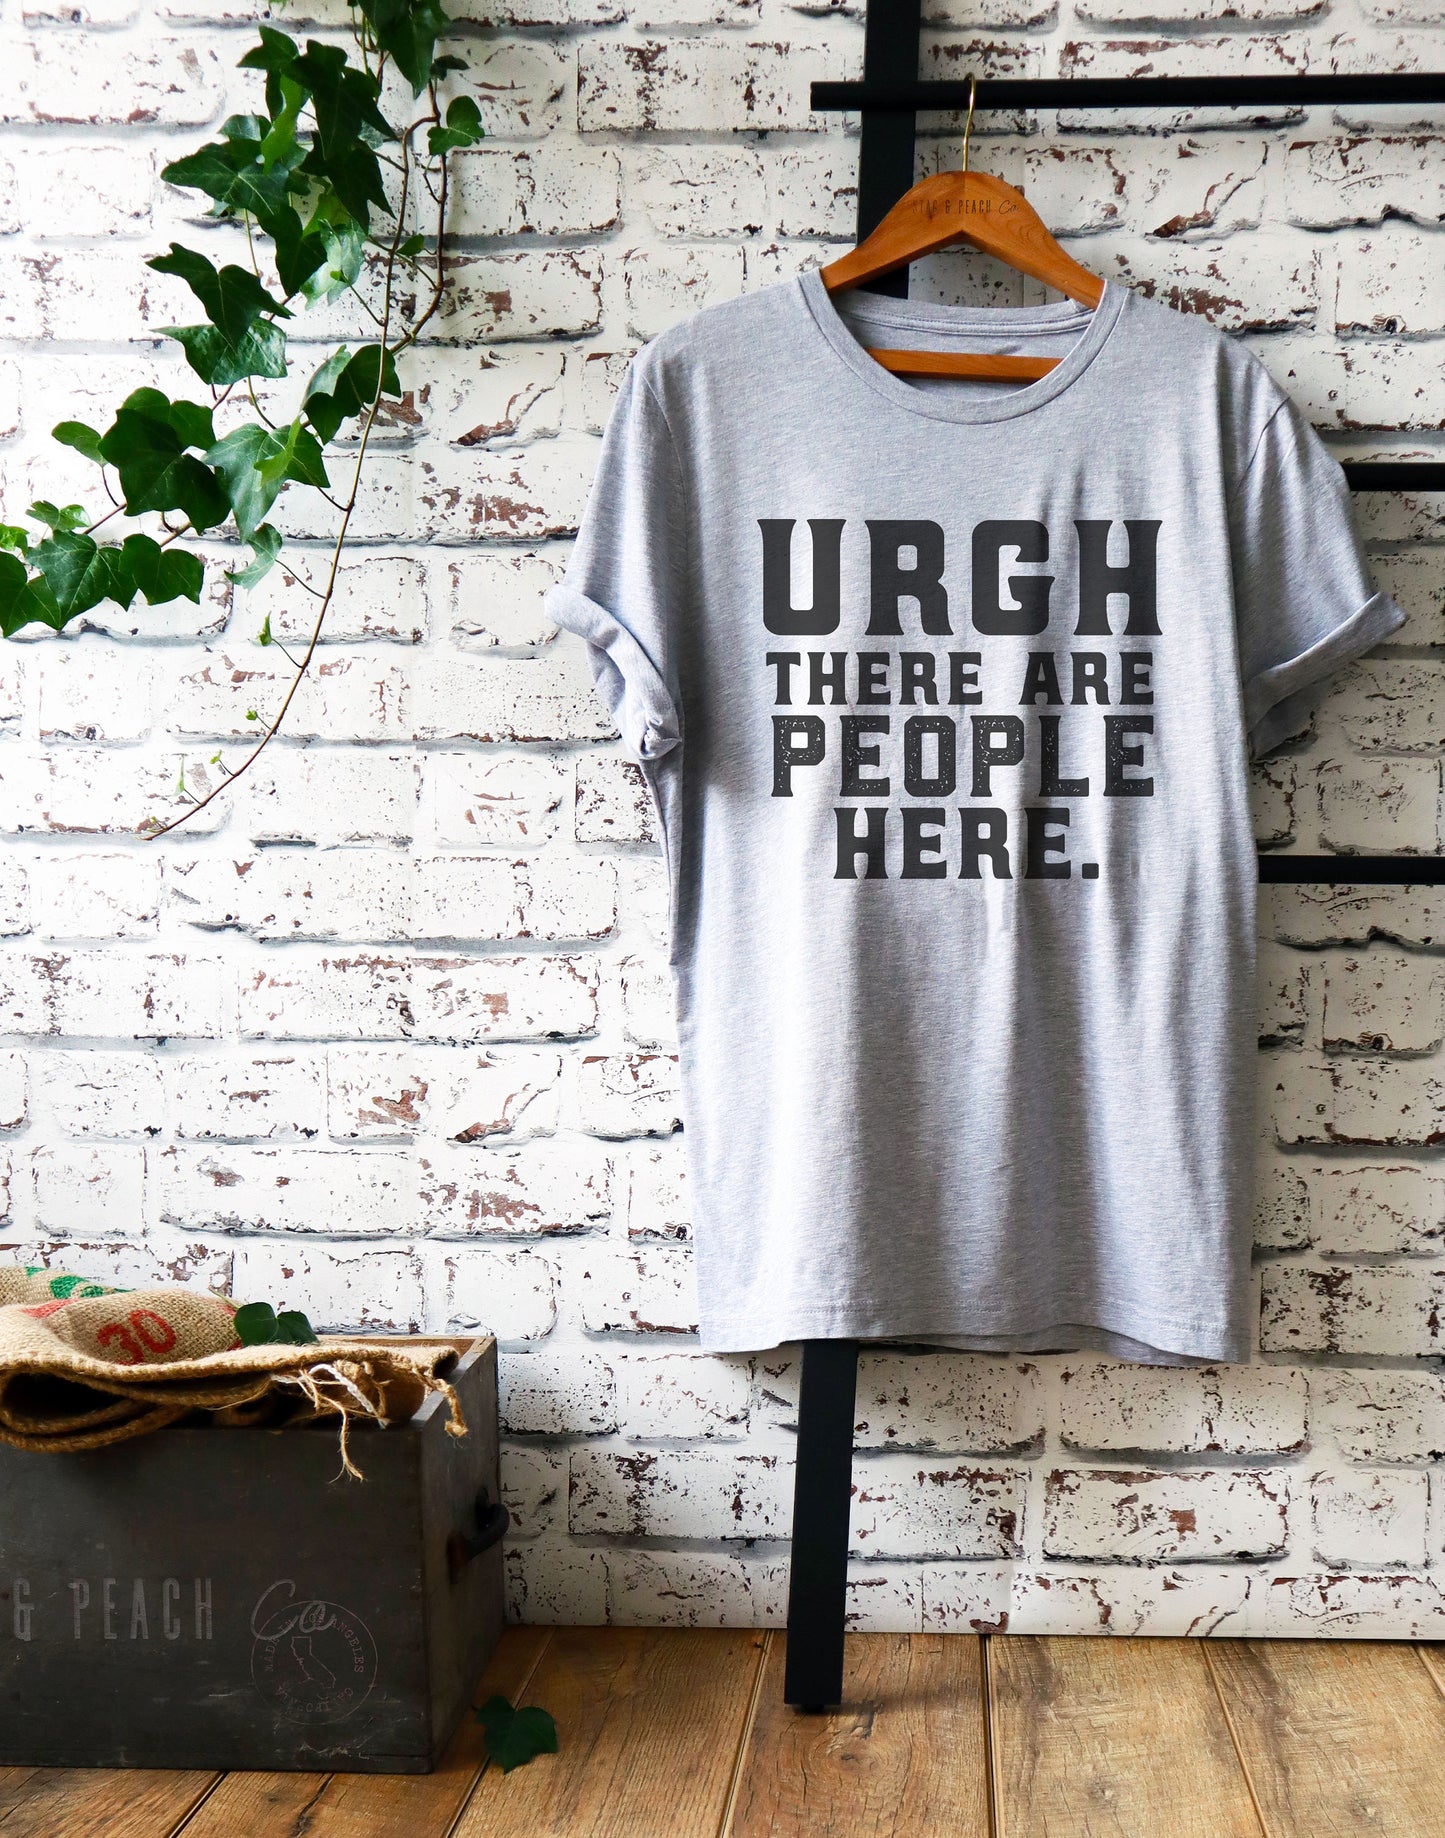 Urgh There Are People Here Unisex Shirt - Funny Introvert Shirt, Introvert Gift, Introverts Unite, Antisocial Shirt, Socially Awkward Shirt